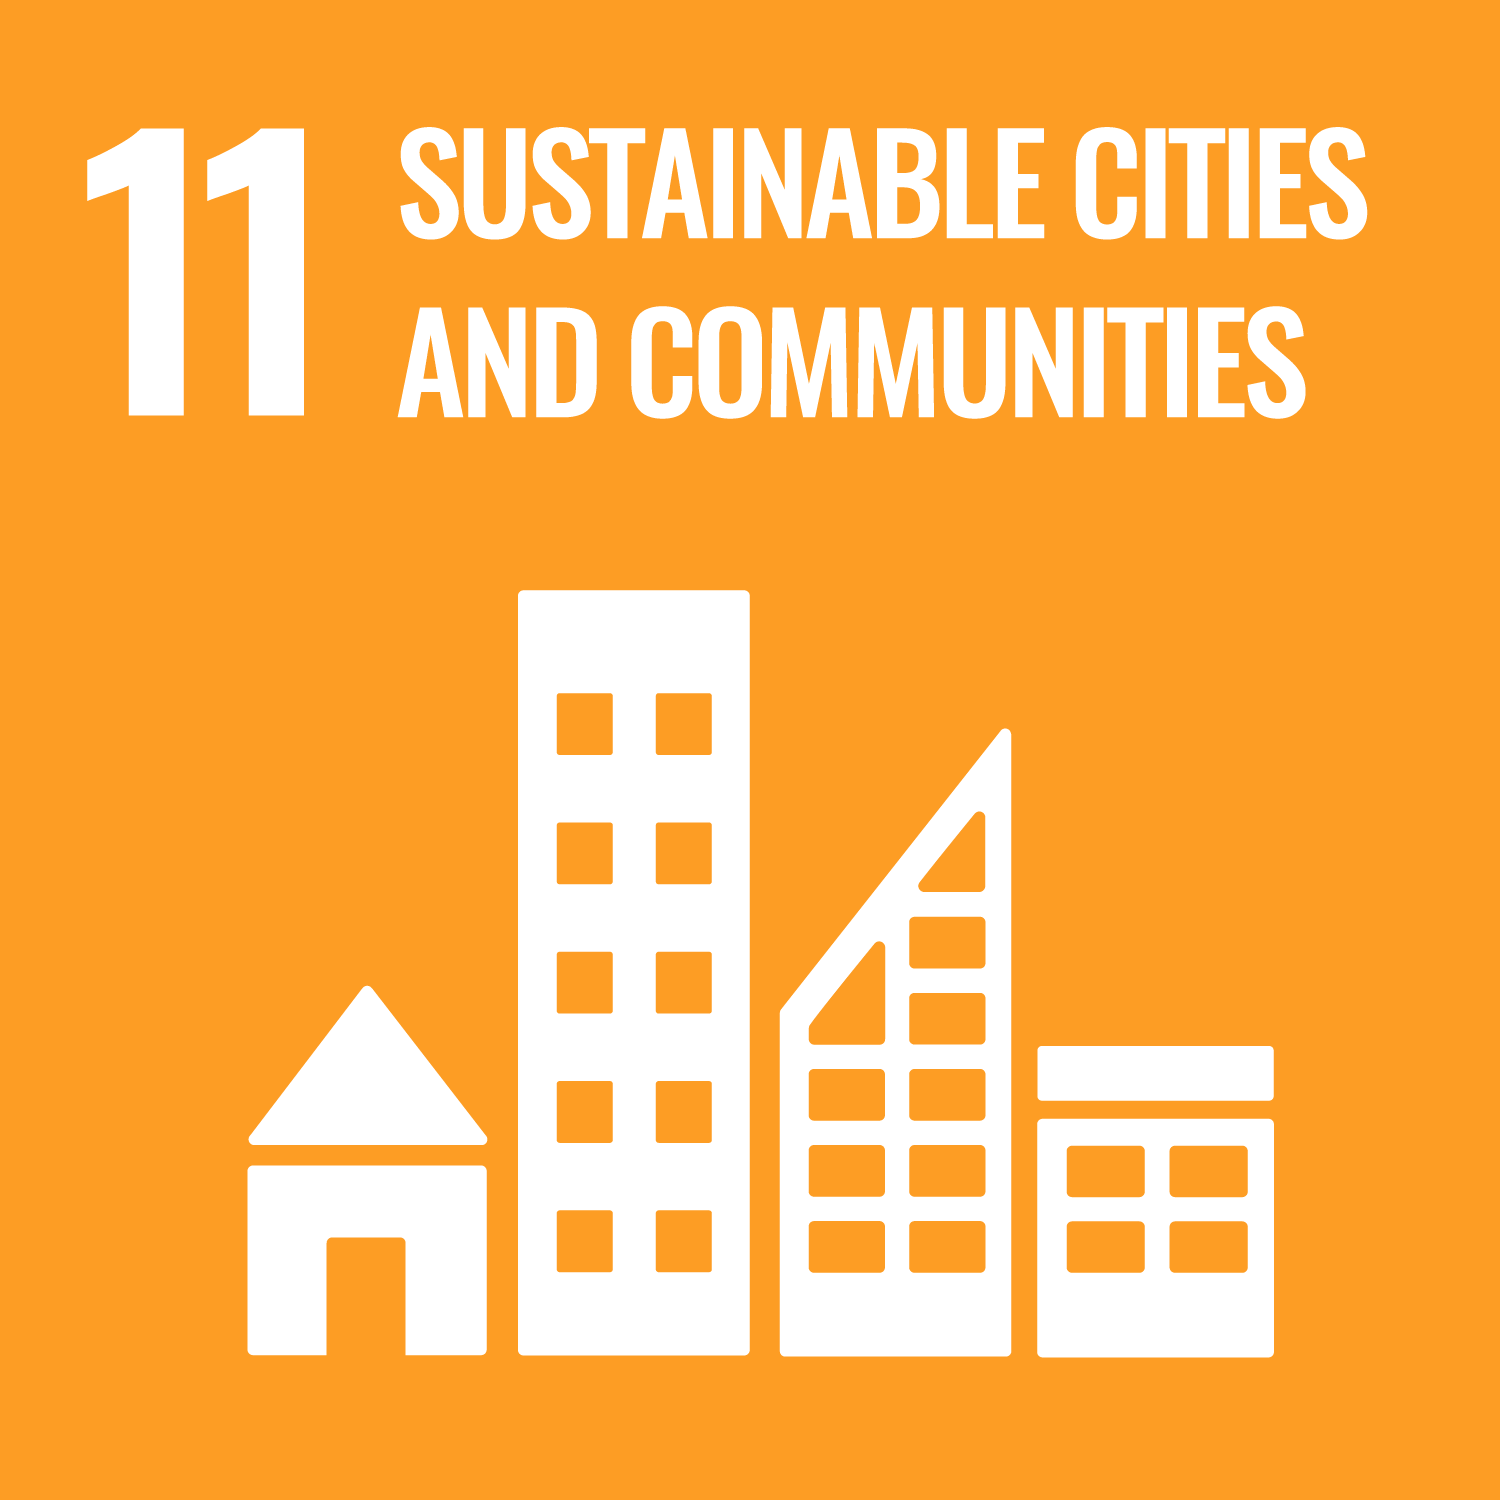 SDG 11- Sustainable Cities and Communities